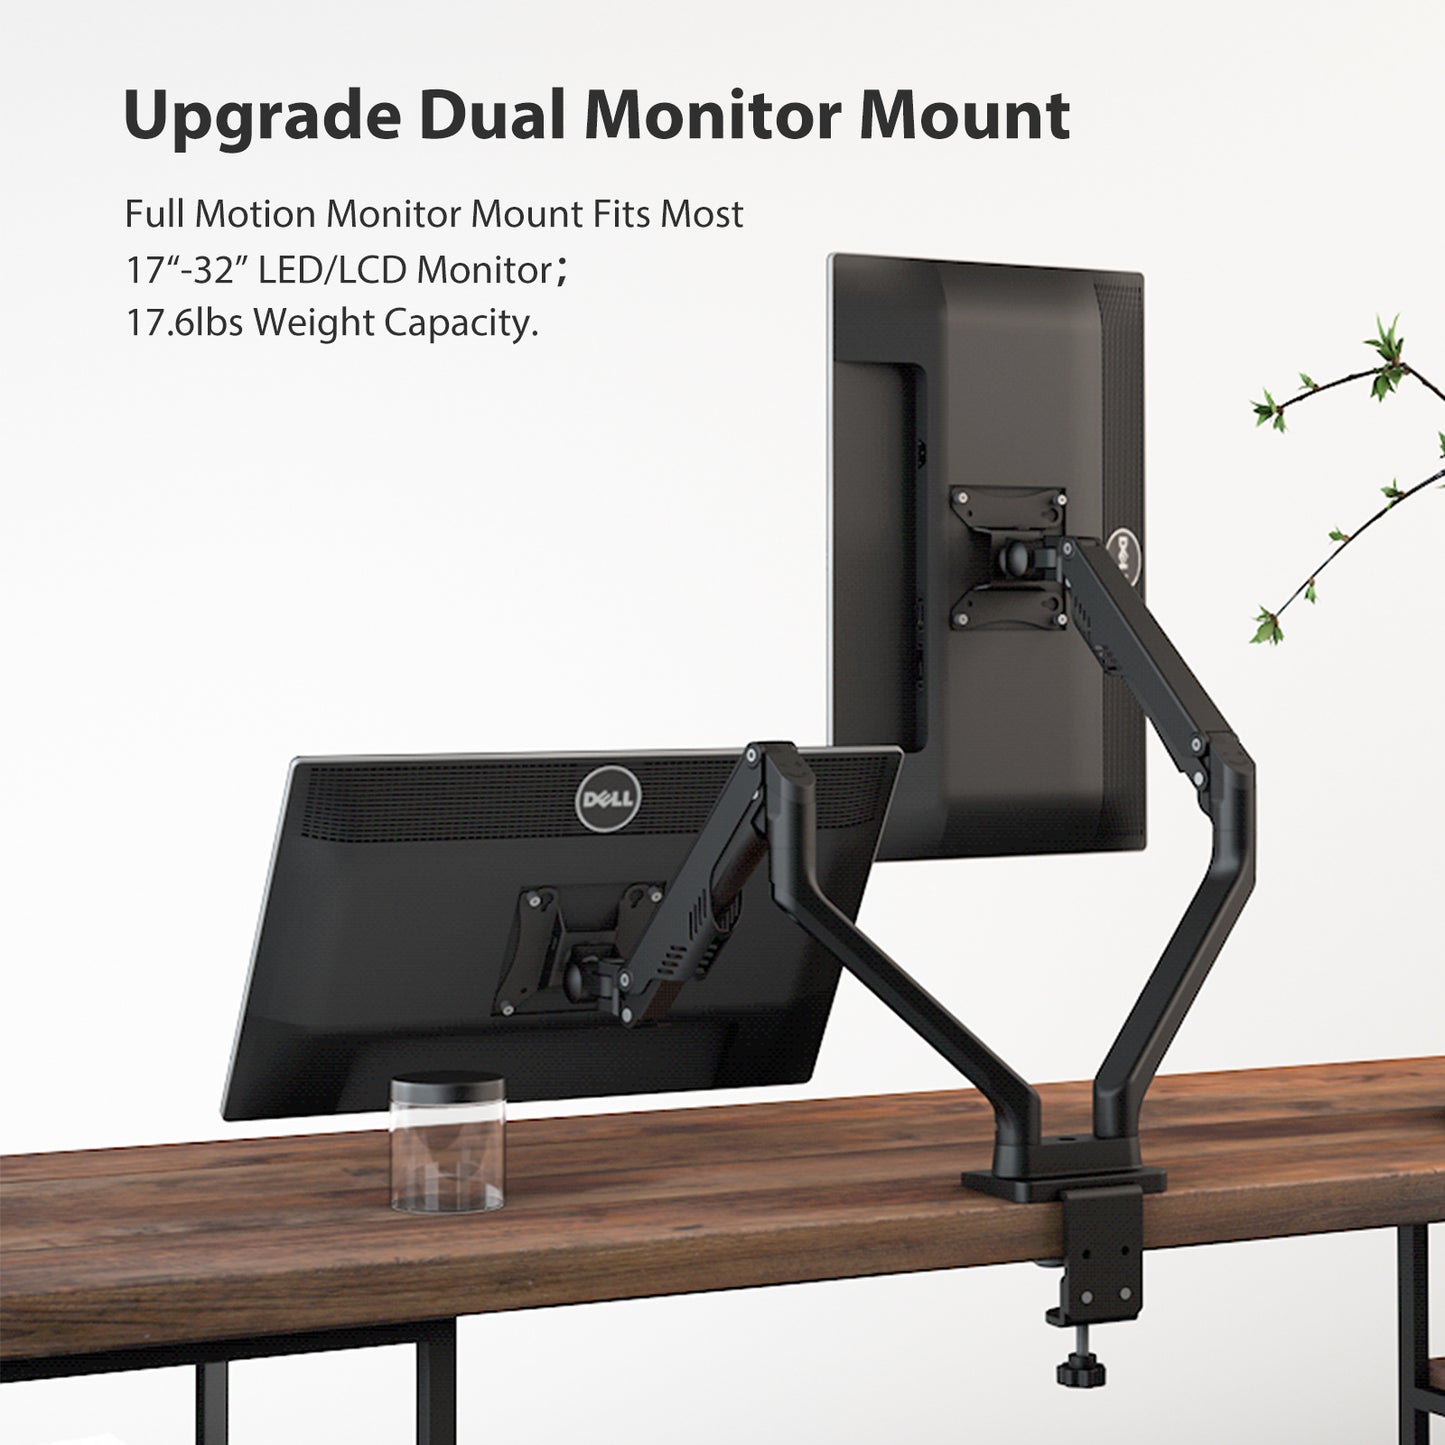 Dual Monitor Arms, For 2 Monitors，Fully Adjustable Gas Spring Desk Mount Swivel Bracket With Clamp, Grommet For Display Up to 32 Inch(D5-Dual)